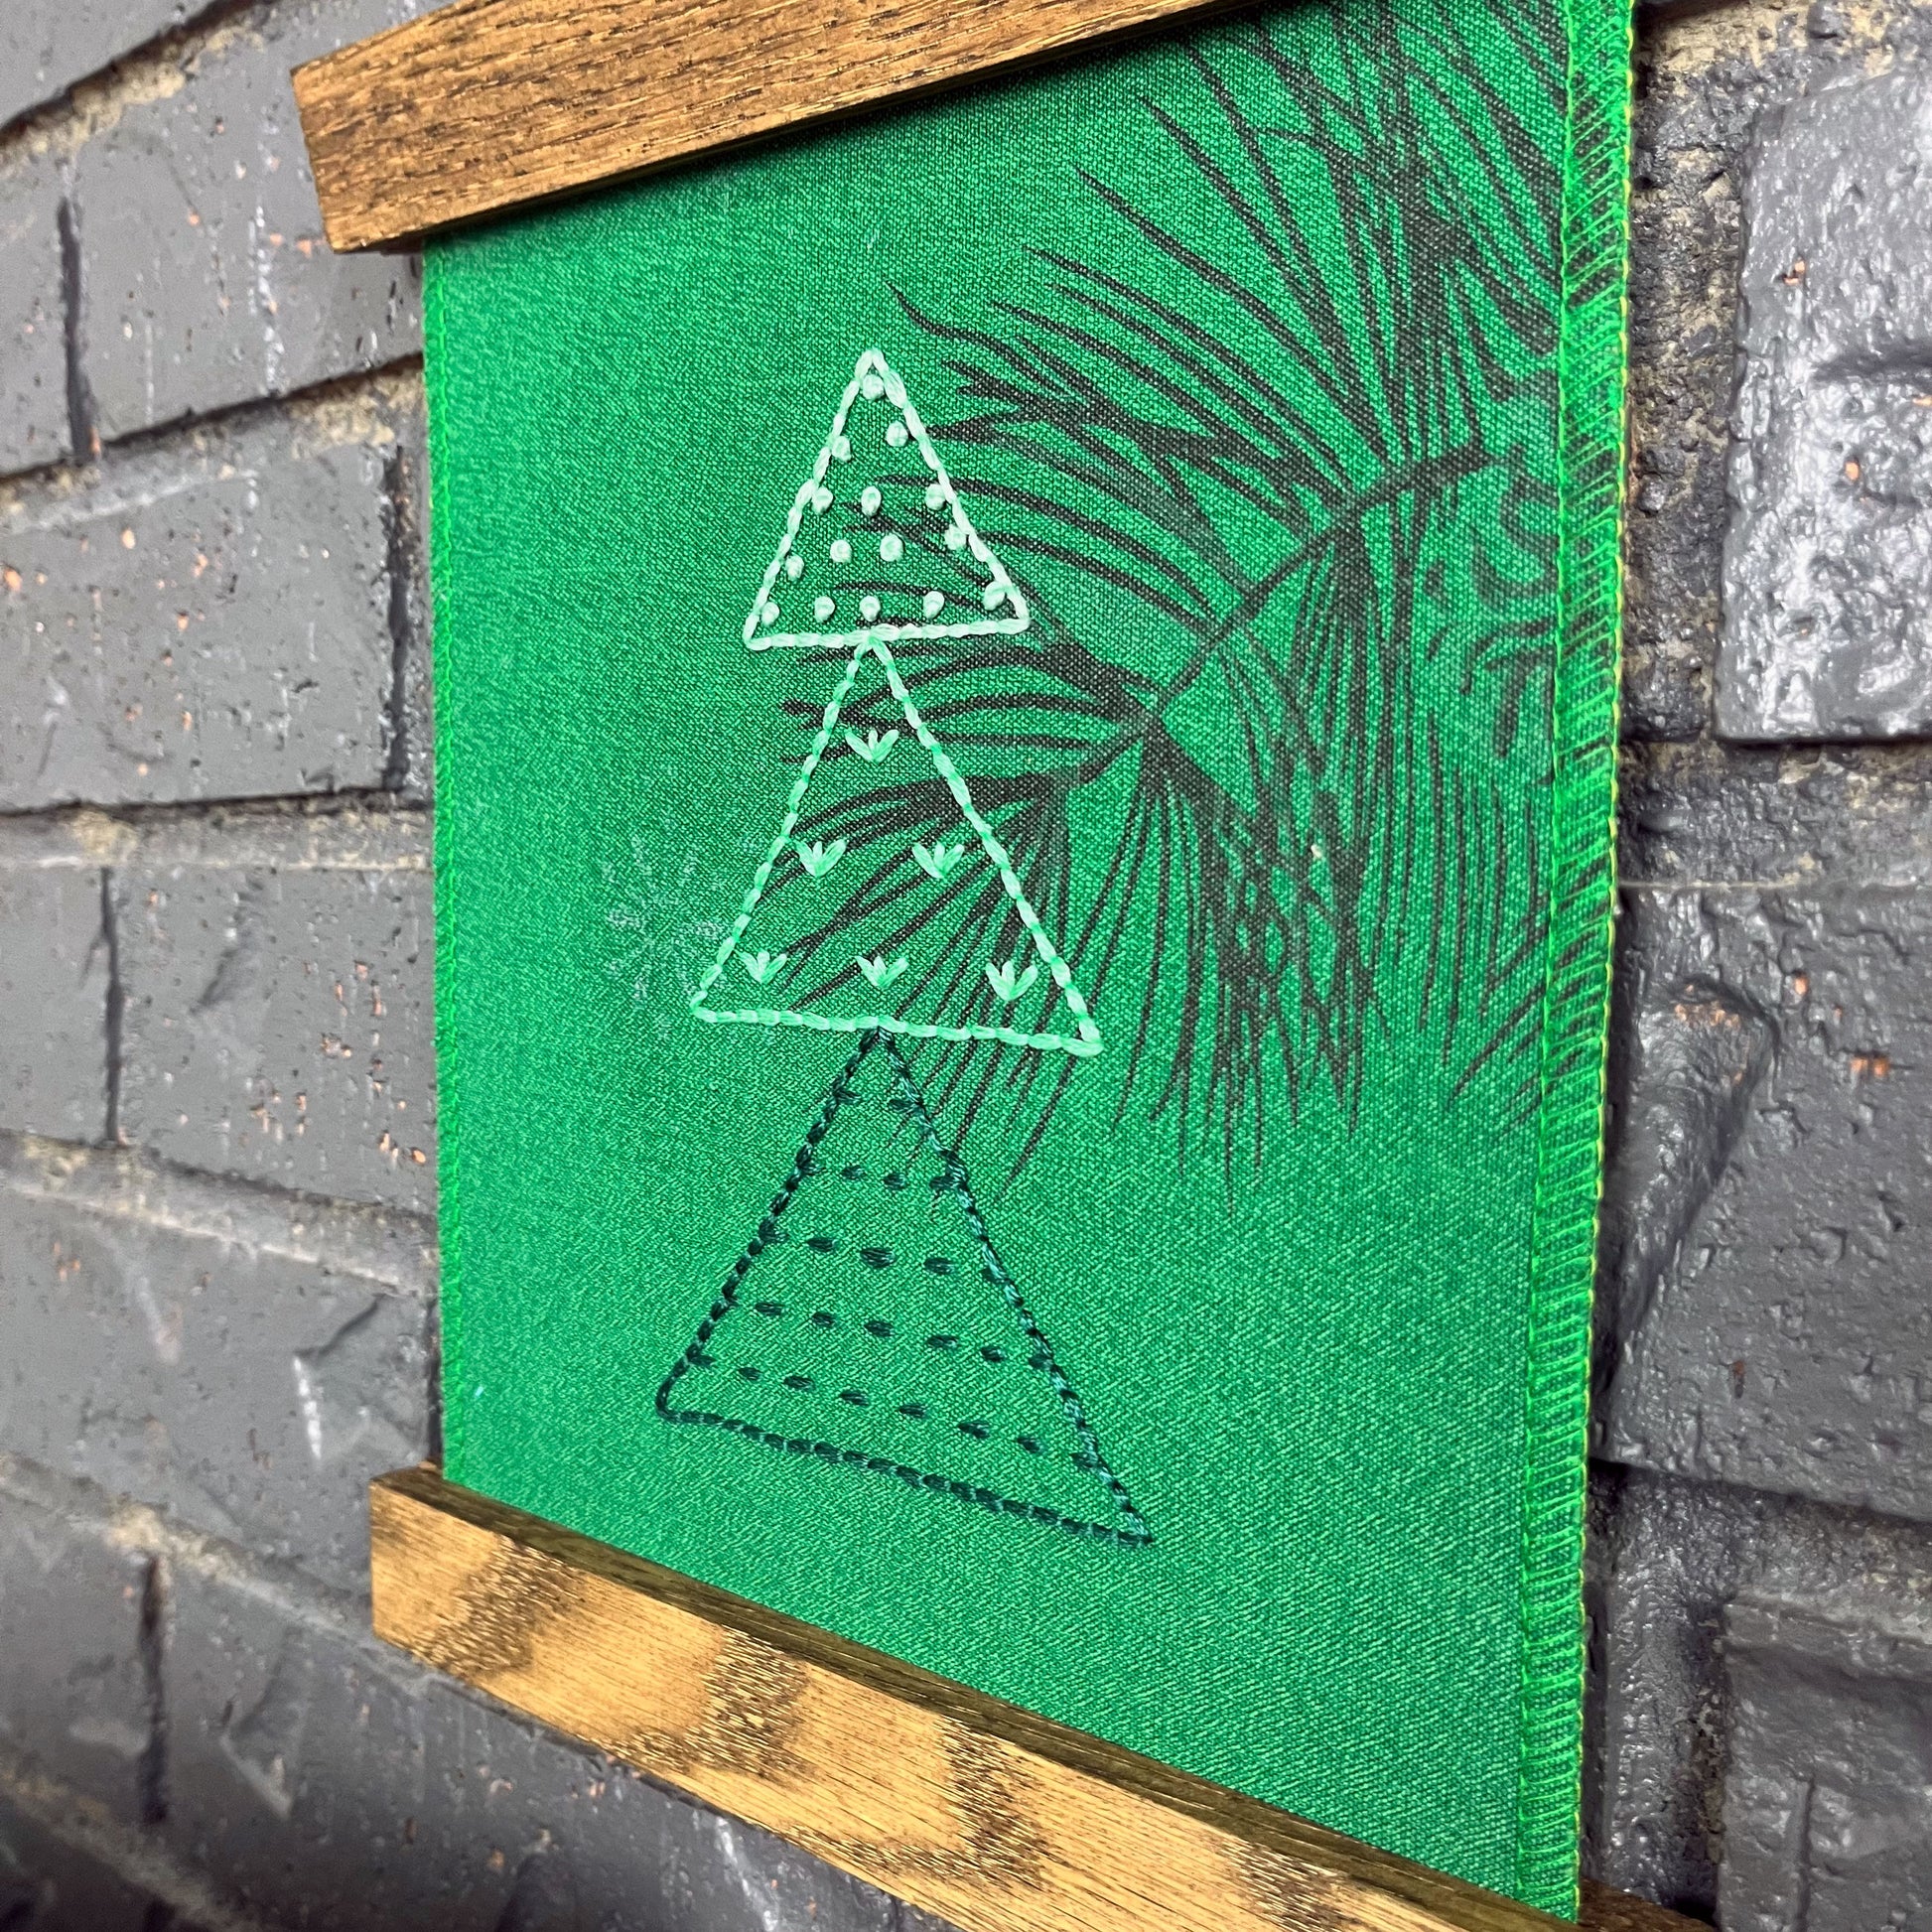 a fabric wall hanging in a magnetic wood frame, made from bright green fabric with a pine branch printed on it, and stitched over with Christmas trees made from three triangles, each triangle filled with different types of stitches in shades of green